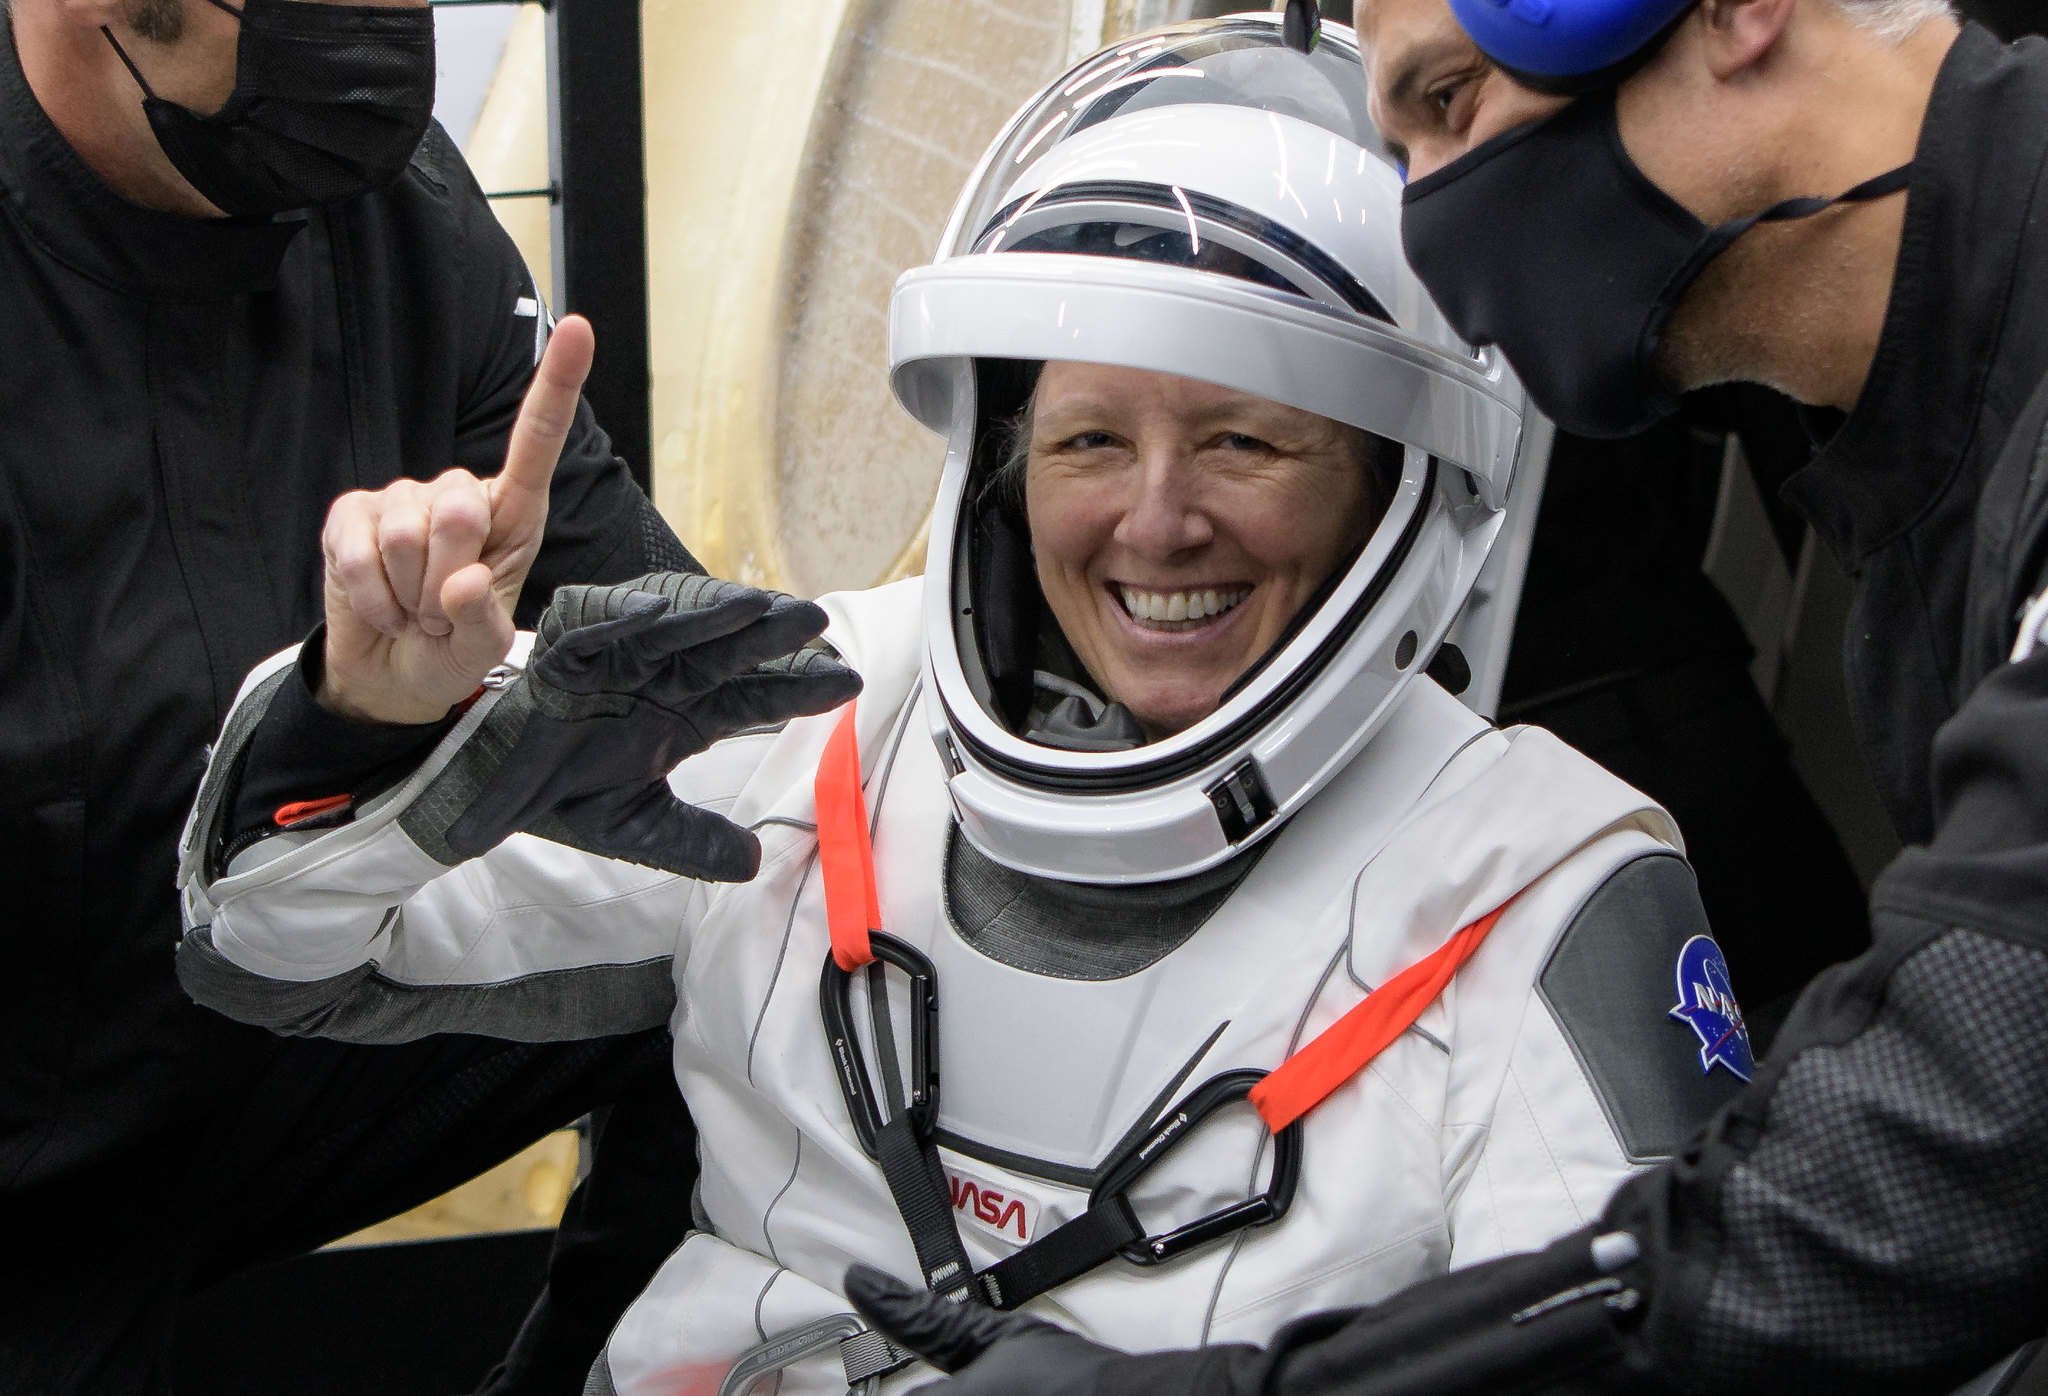 NASA astronaut Shannon Walker celebrates after returning to Earth on SpaceX's Crew-1 Crew Dragon capsule Resilience with a splashdown in the Gulf of Mexico near Panama City, Florida on May 2, 2021.